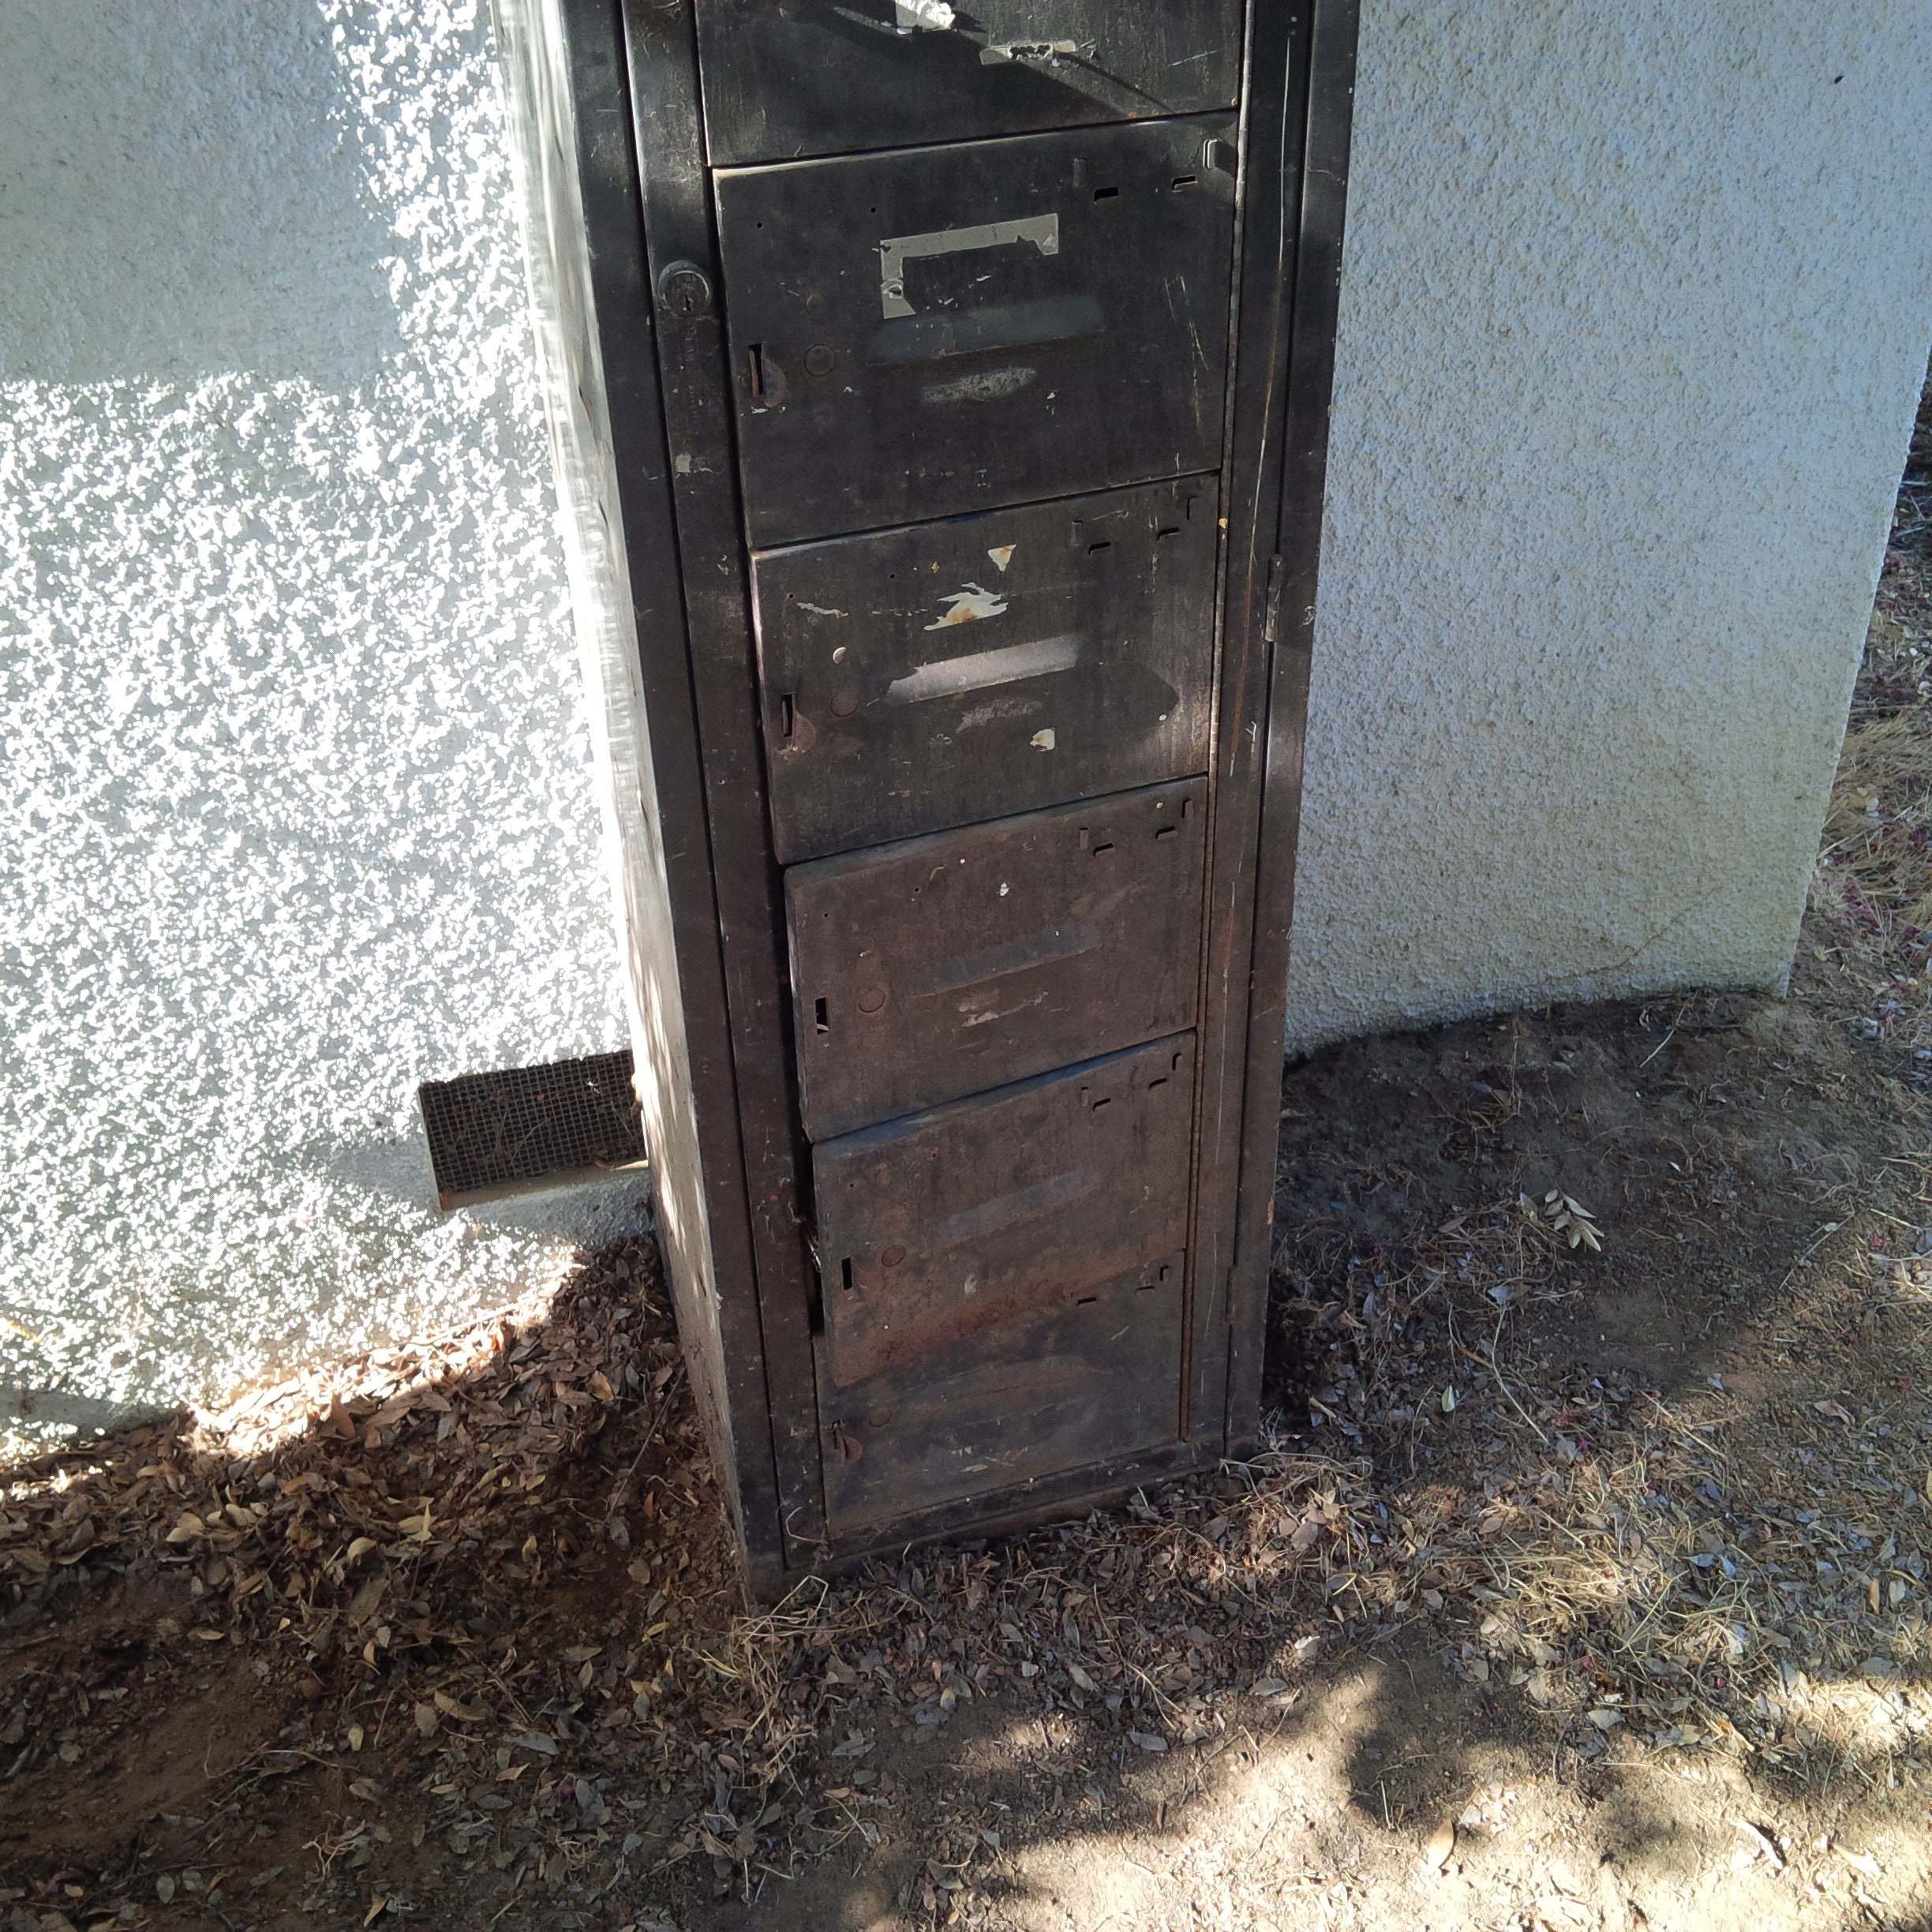 Black Damage Local Cabinets Pick Metal & Vintage Gym - Compartment // 10 // up School Etsy Available Locker CA // Rust